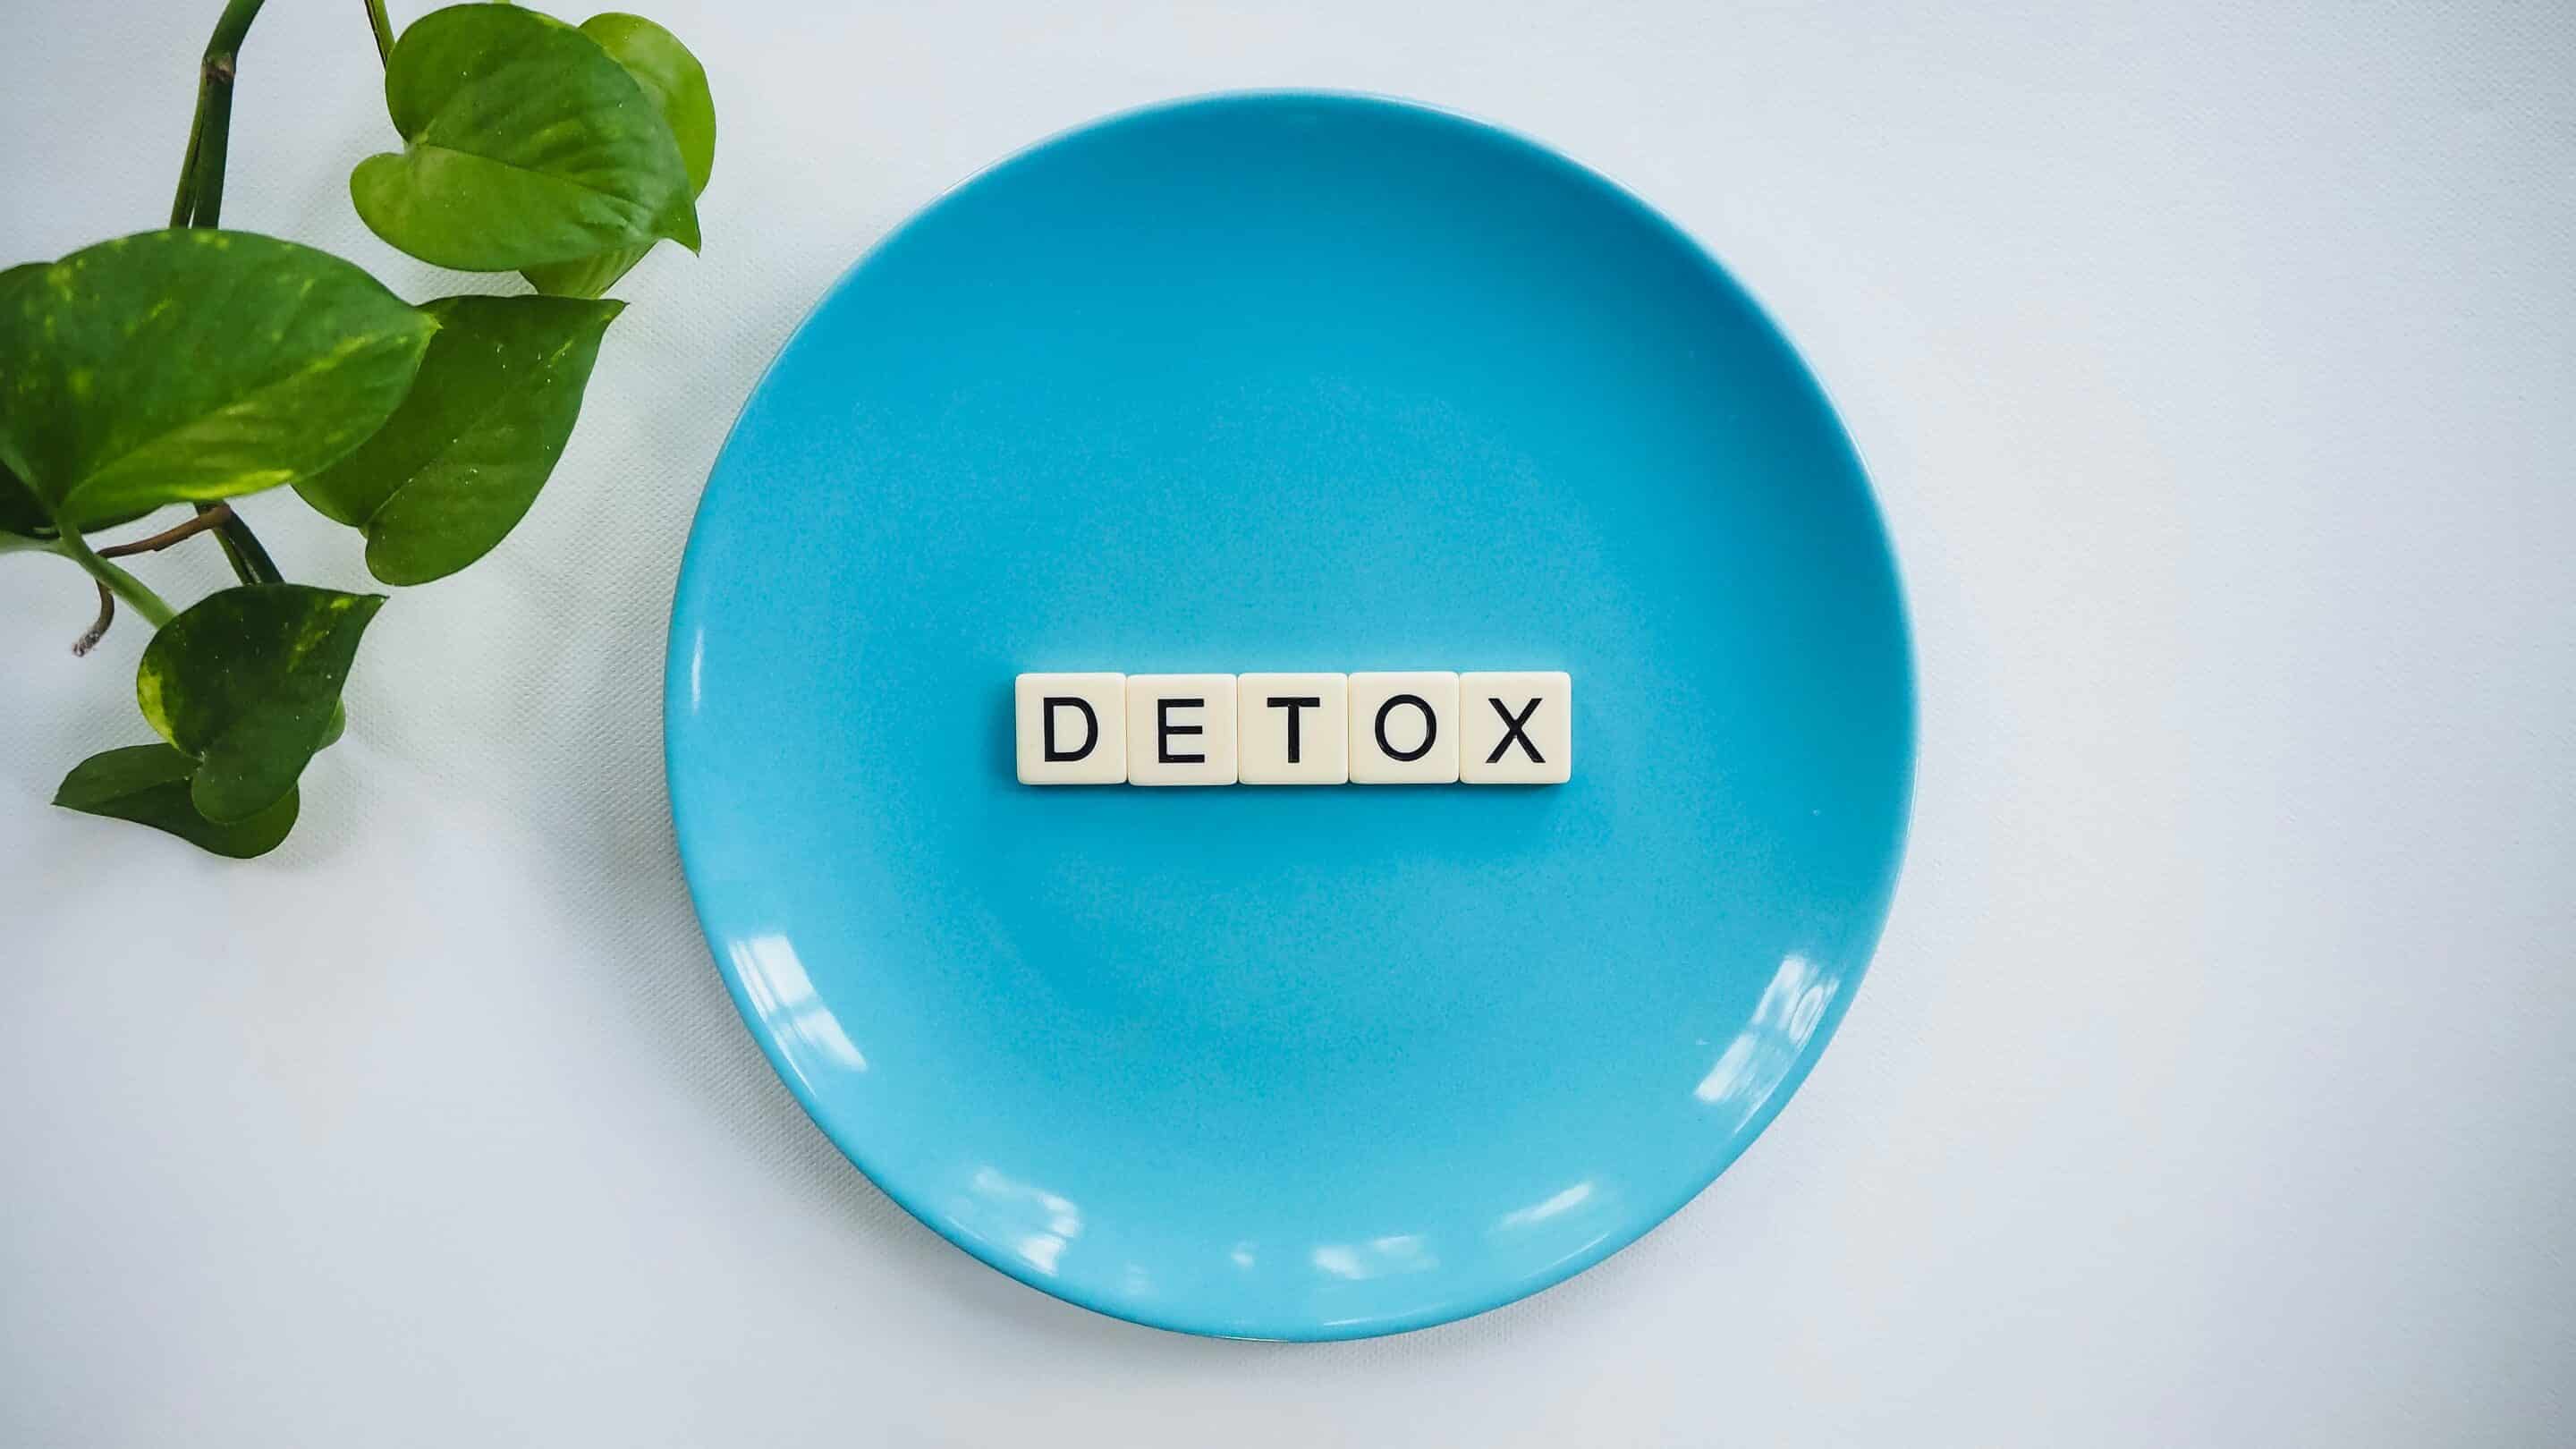 Detox spelled on a plate with game pieces